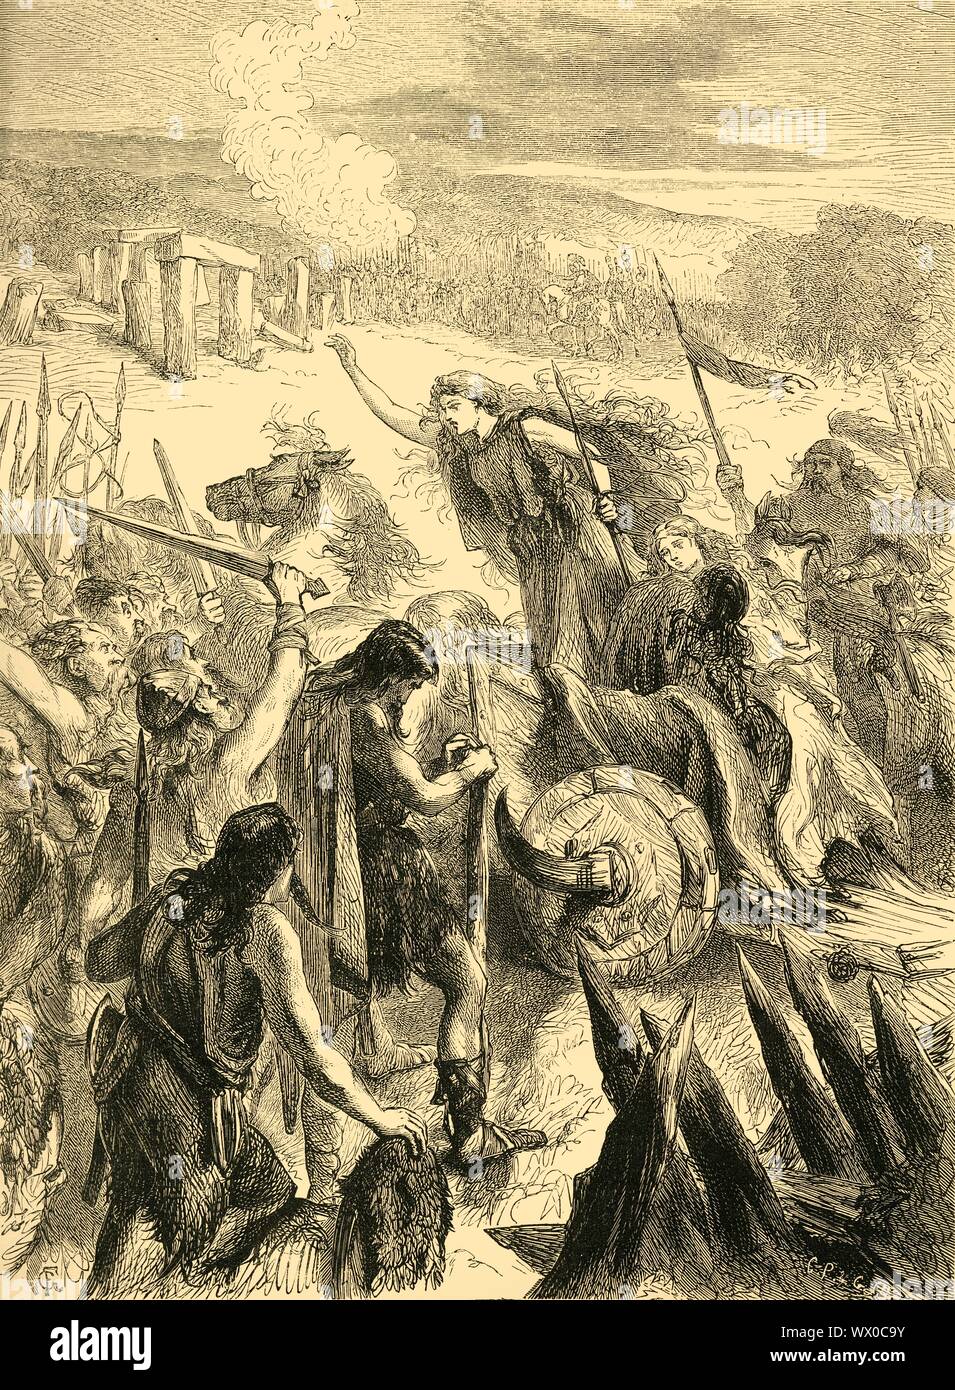 'Boadicea', mid-late 19th century. Boudicca encourages her warriors from a chariot with blades on the wheels. The Roman army is gathered near a stone circle in the distance. Boudicca (c25-62 AD), queen of the British Celtic Iceni tribe, led an uprising against the occupying forces of the Roman Empire in 60 or 61 AD. She died shortly after its failure, having supposedly poisoned herself. She is considered a British folk heroine. From &quot;Cassell's Illustrated History of England&quot;. [Cassell, Petter &amp; Galpin, 1873] Stock Photo